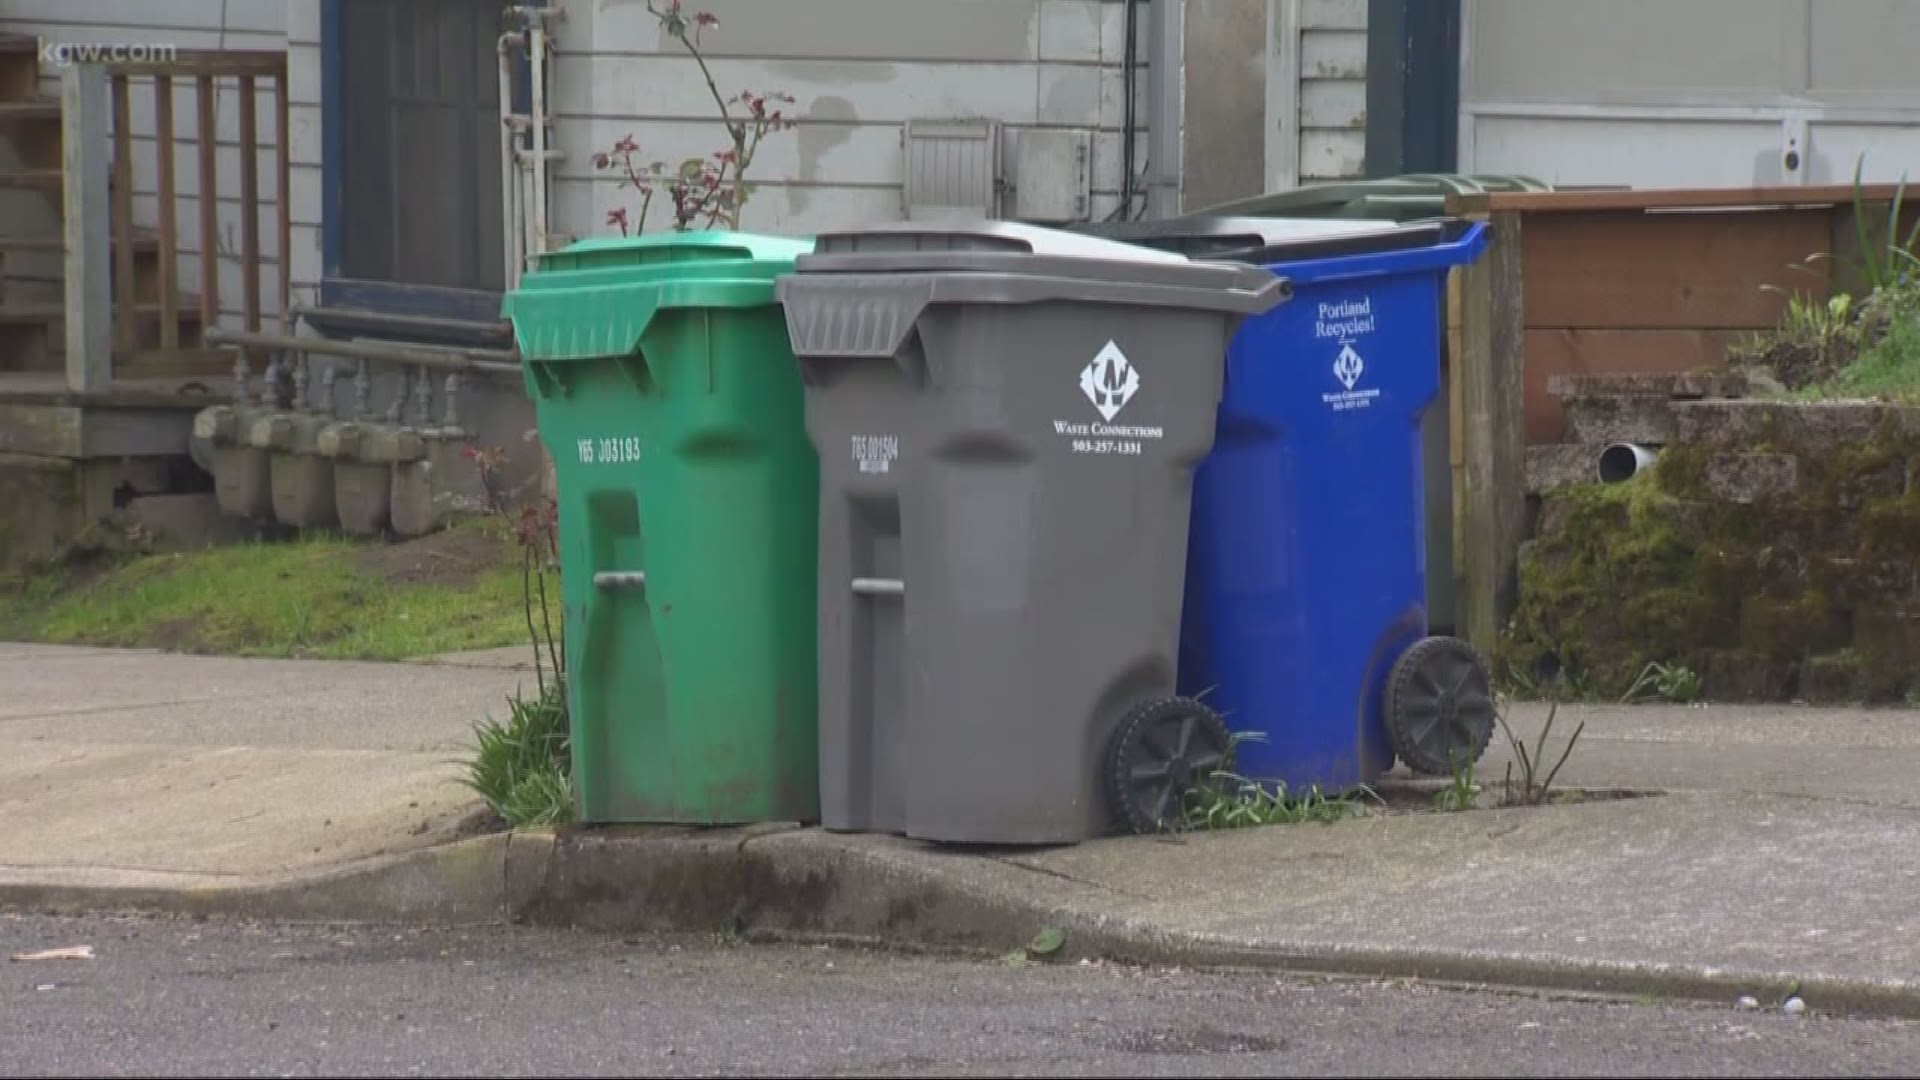 Portland's garbage rates are likely going up soon.